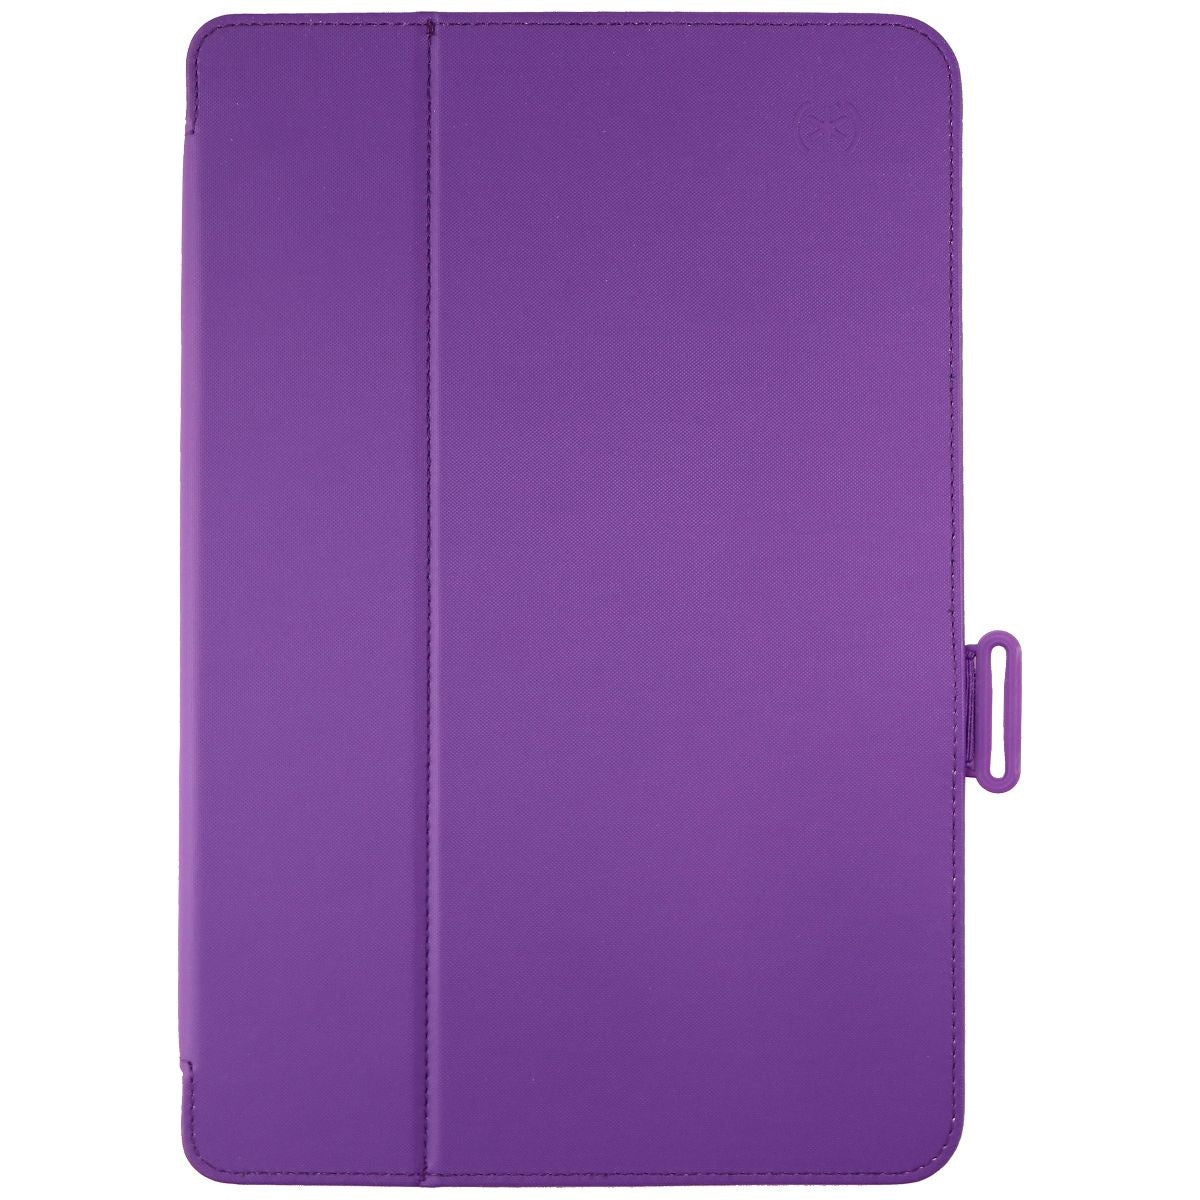 Speck Balance Folio Case for Samsung Galaxy Tab S6 - Acai Purple/Magenta Pink iPad/Tablet Accessories - Cases, Covers, Keyboard Folios Speck    - Simple Cell Bulk Wholesale Pricing - USA Seller